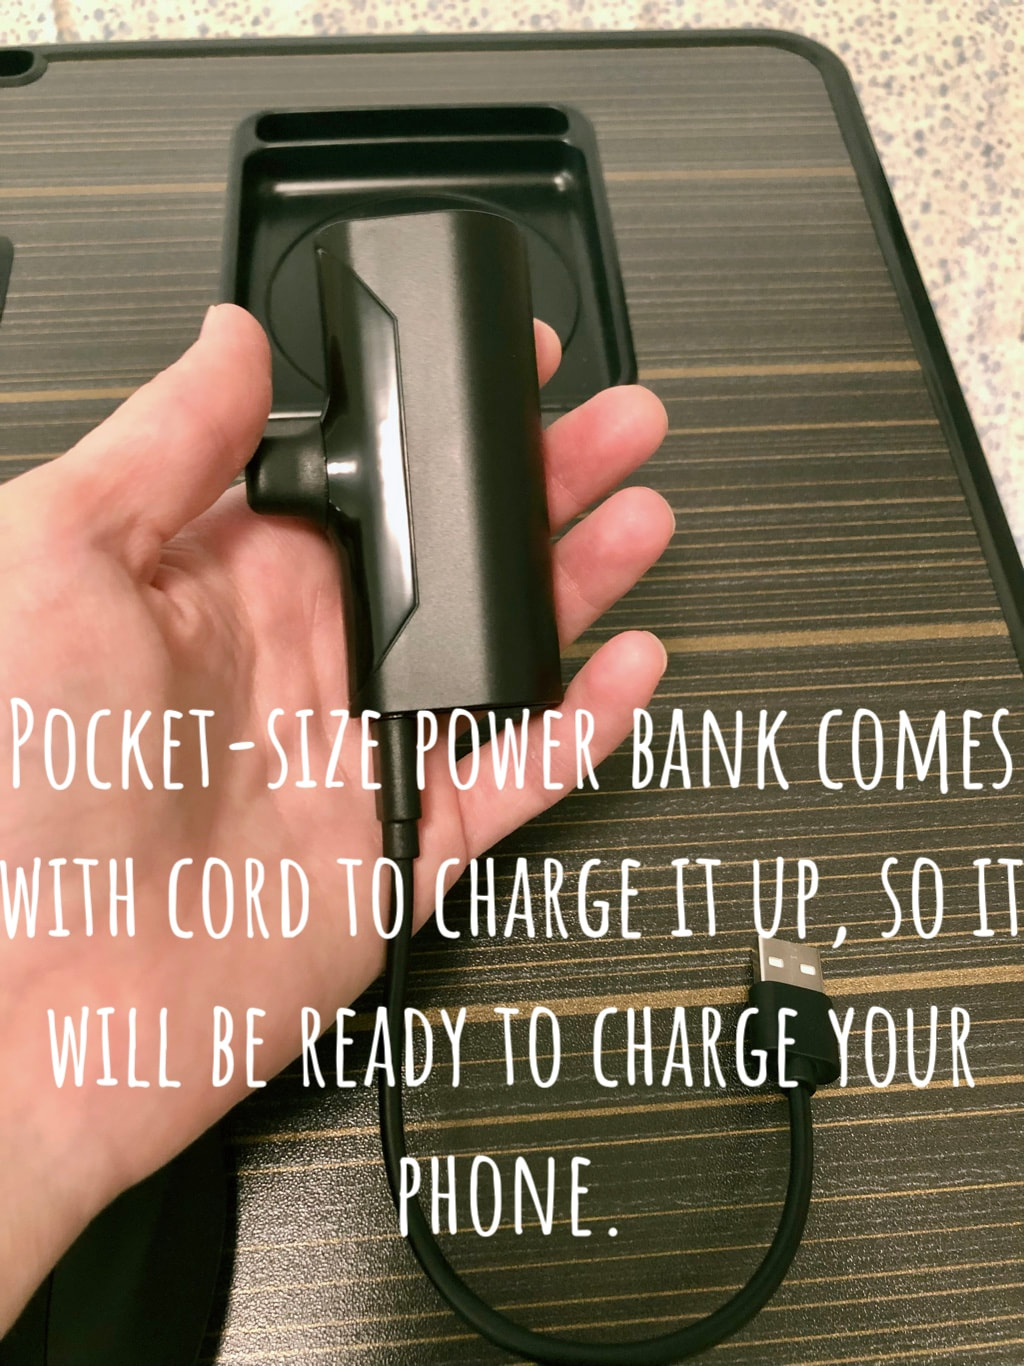 Pocket-size power bank and charger for iPhone 8 and iPhones.